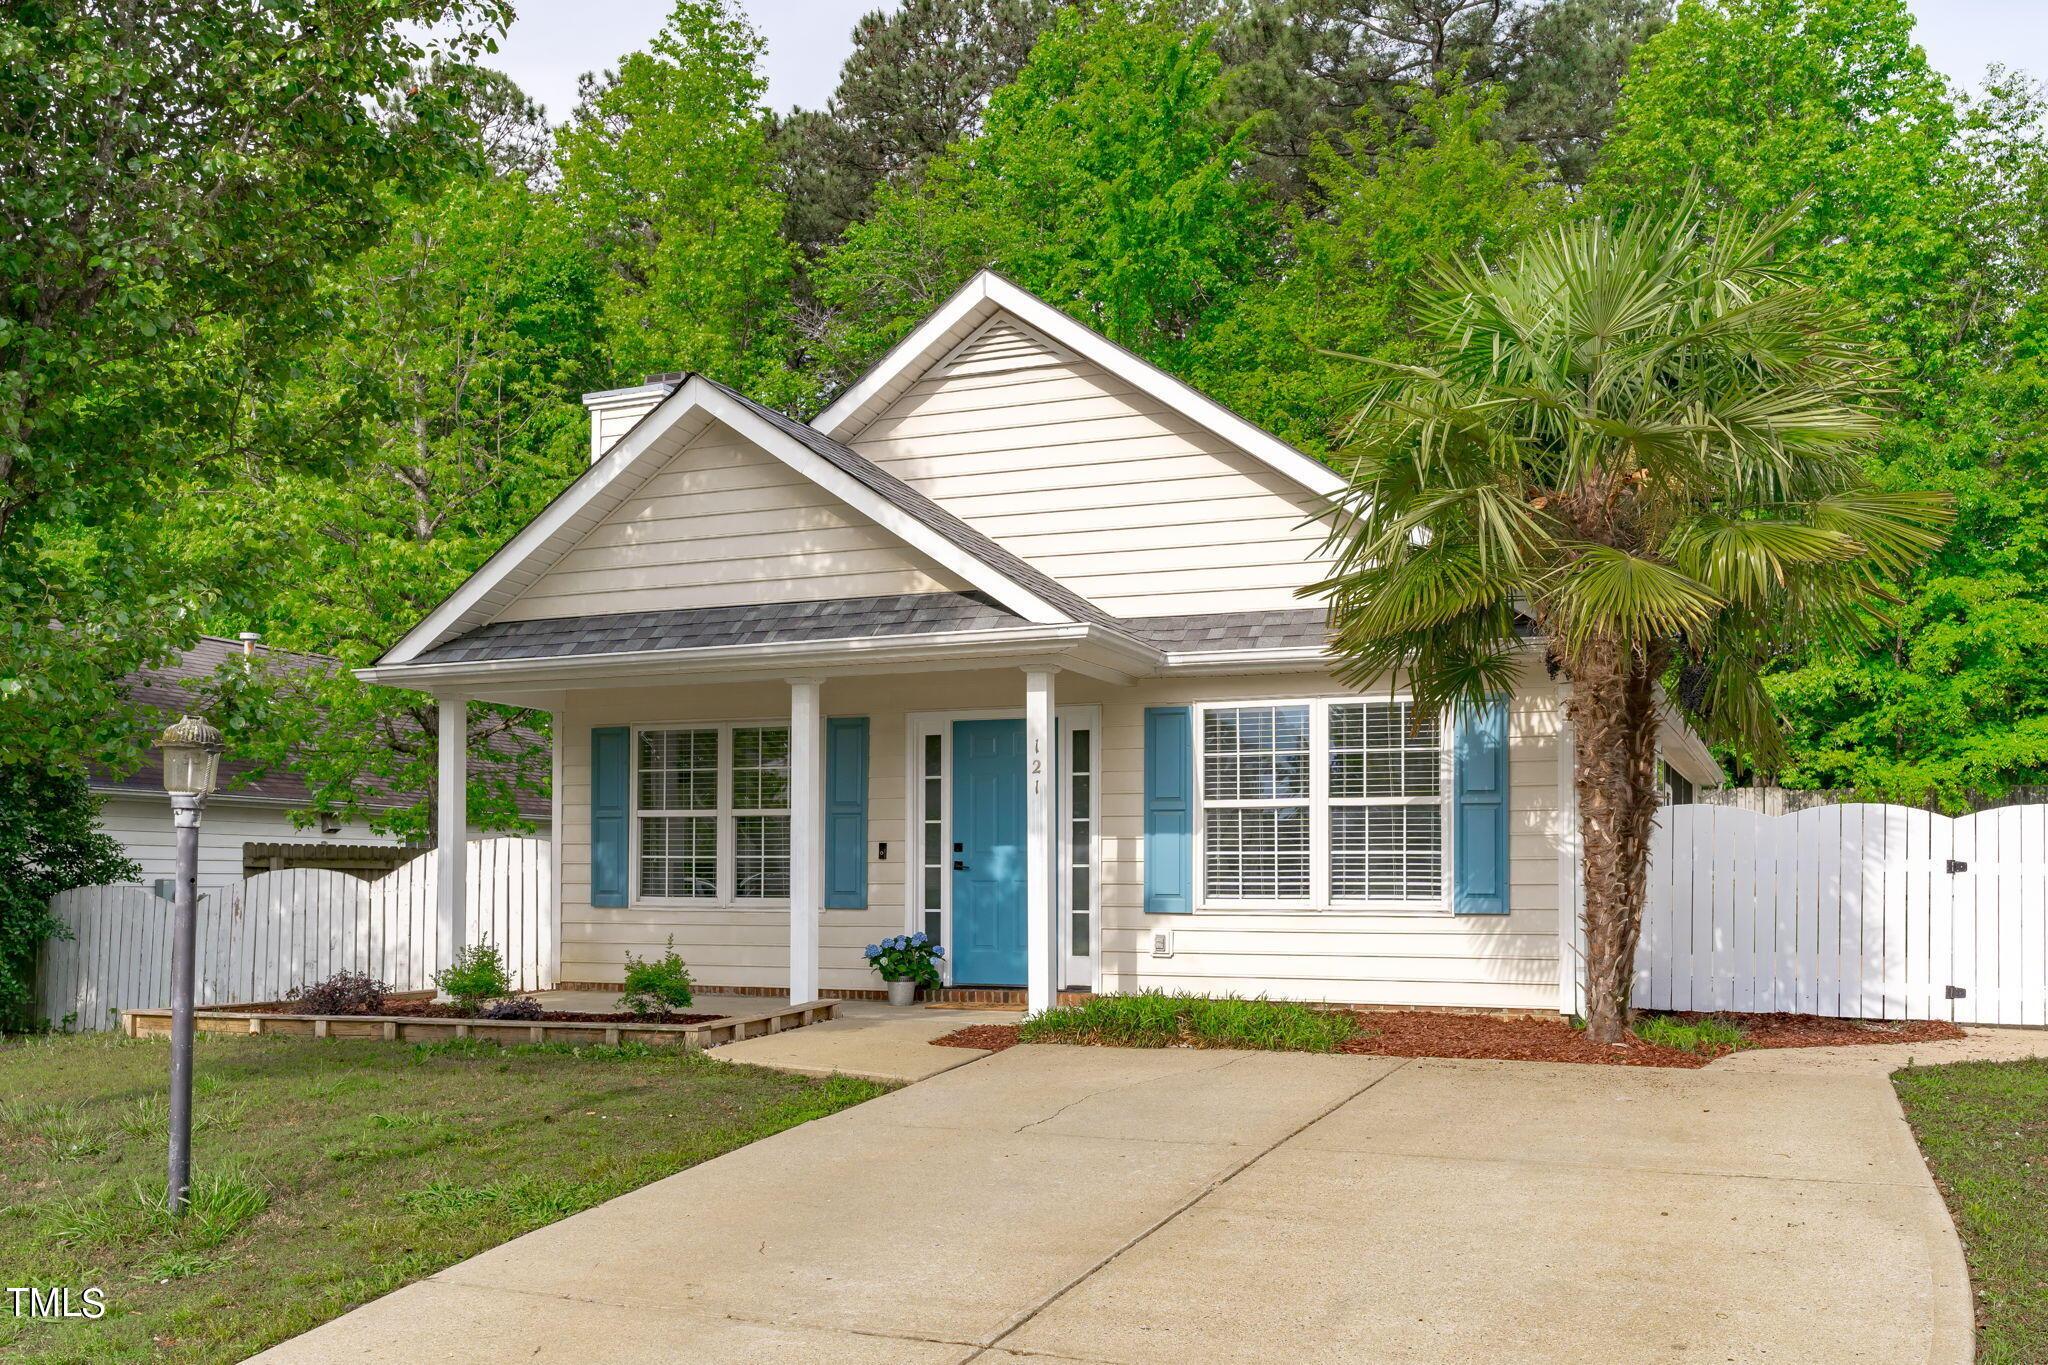 Photo one of 121 Cabana Dr Apex NC 27539 | MLS 10025242